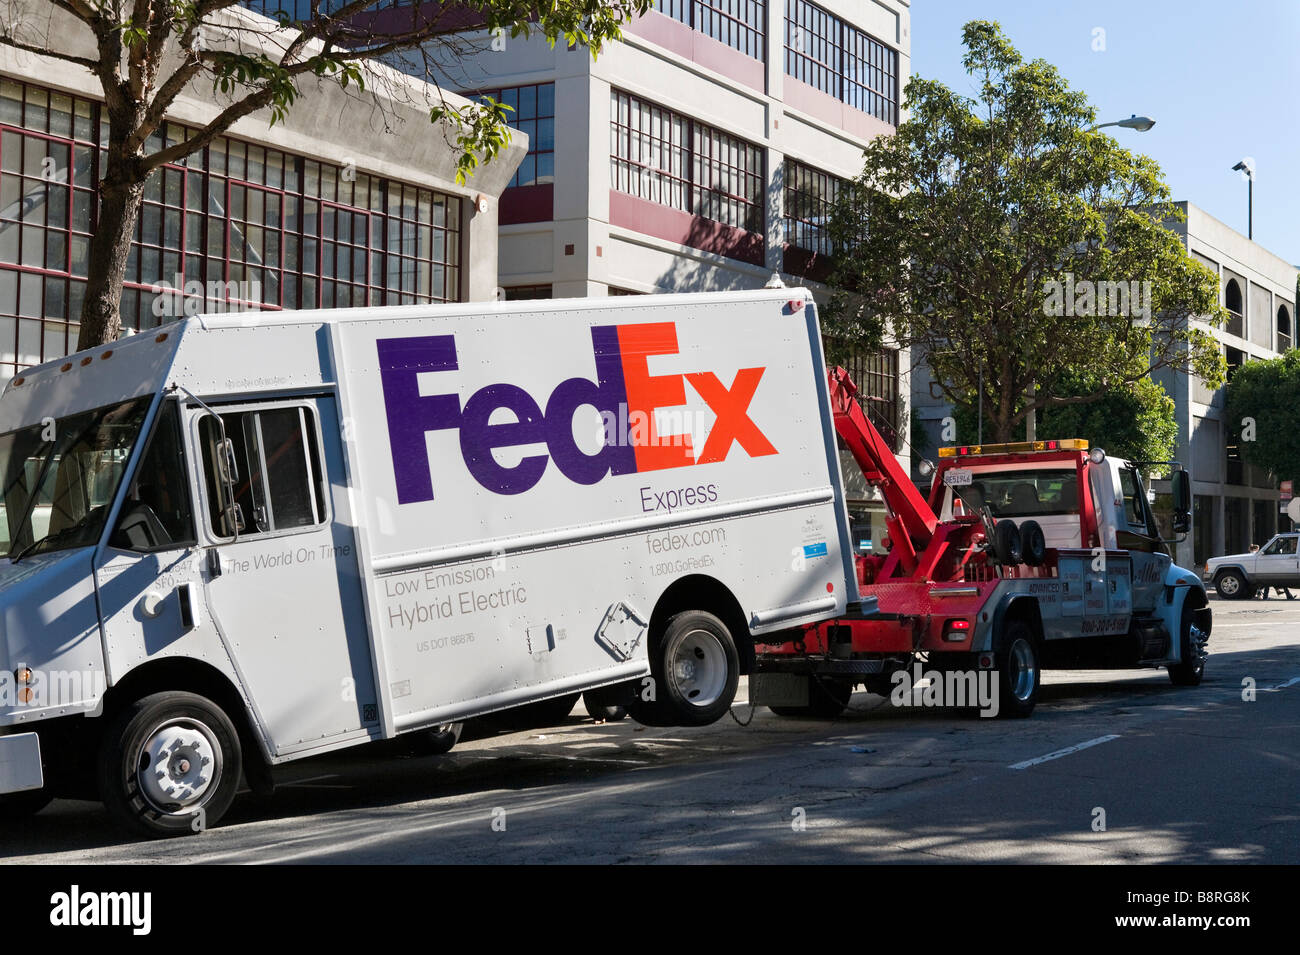 A FedEx Express hybrid electric delivery van being towed by a tow truck, downtown San Francisco, California, USA Stock Photo